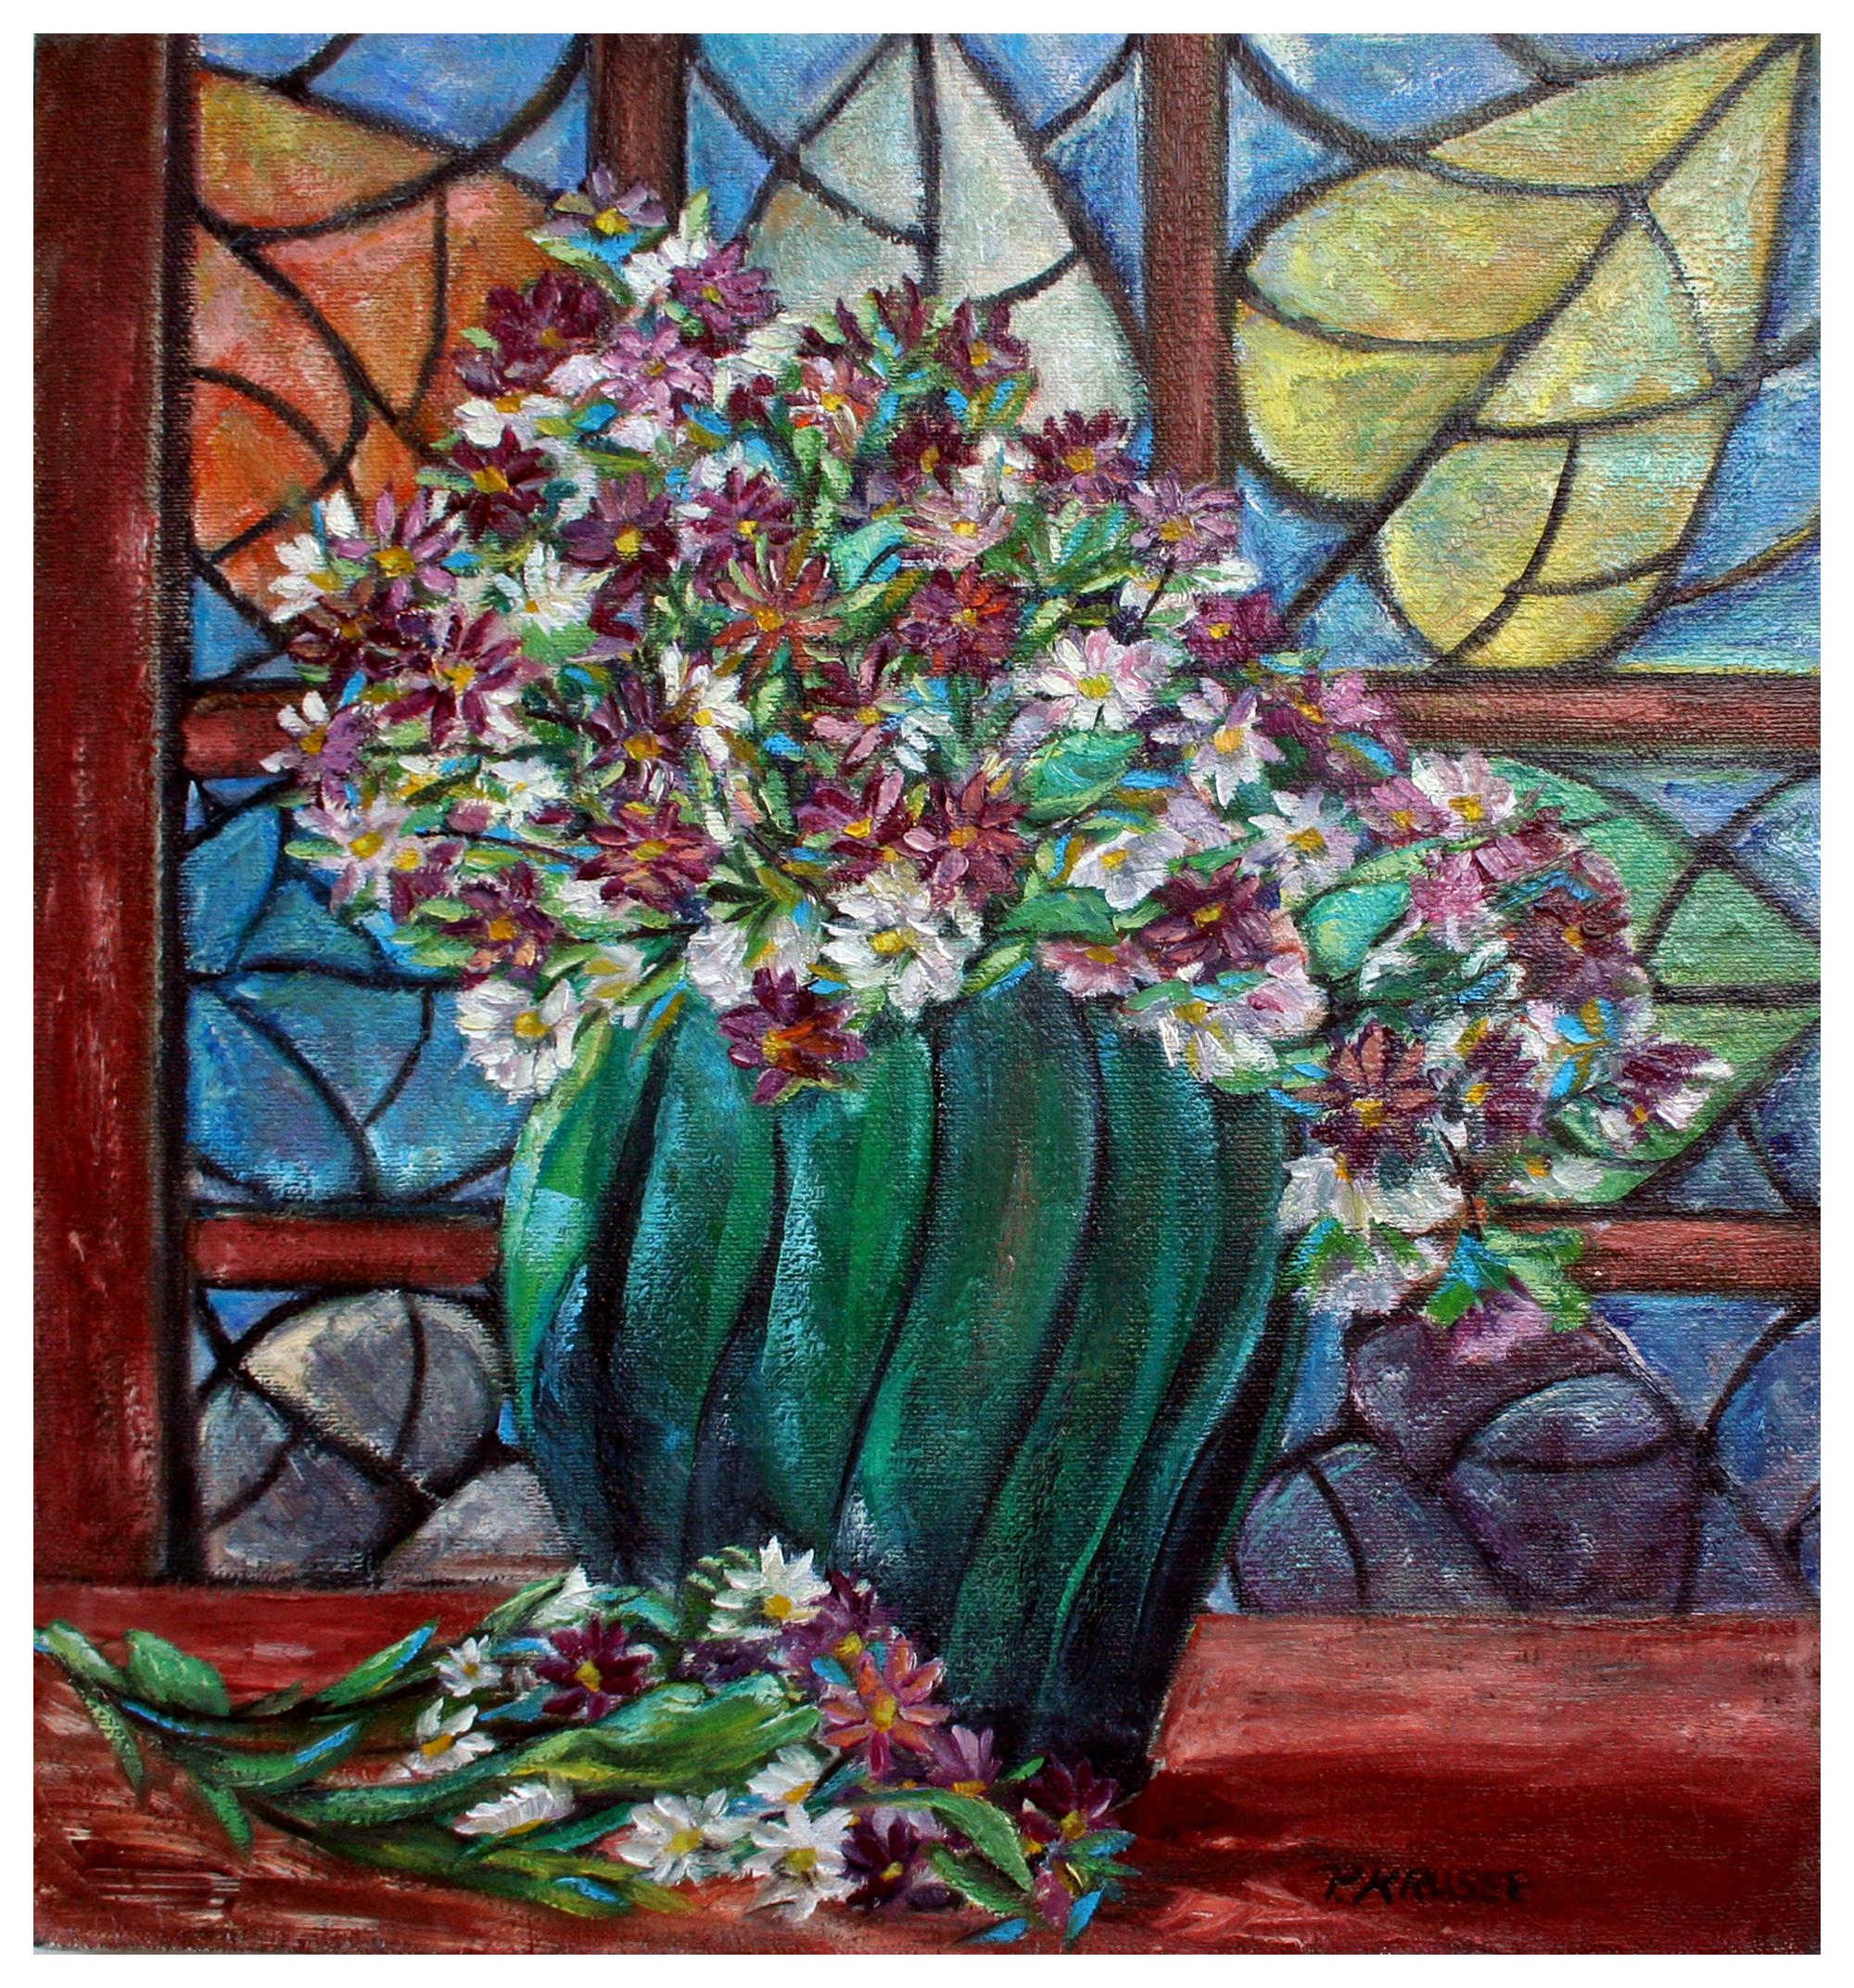 Arts & Crafts Style Floral Still Life wit Stained Glass Window